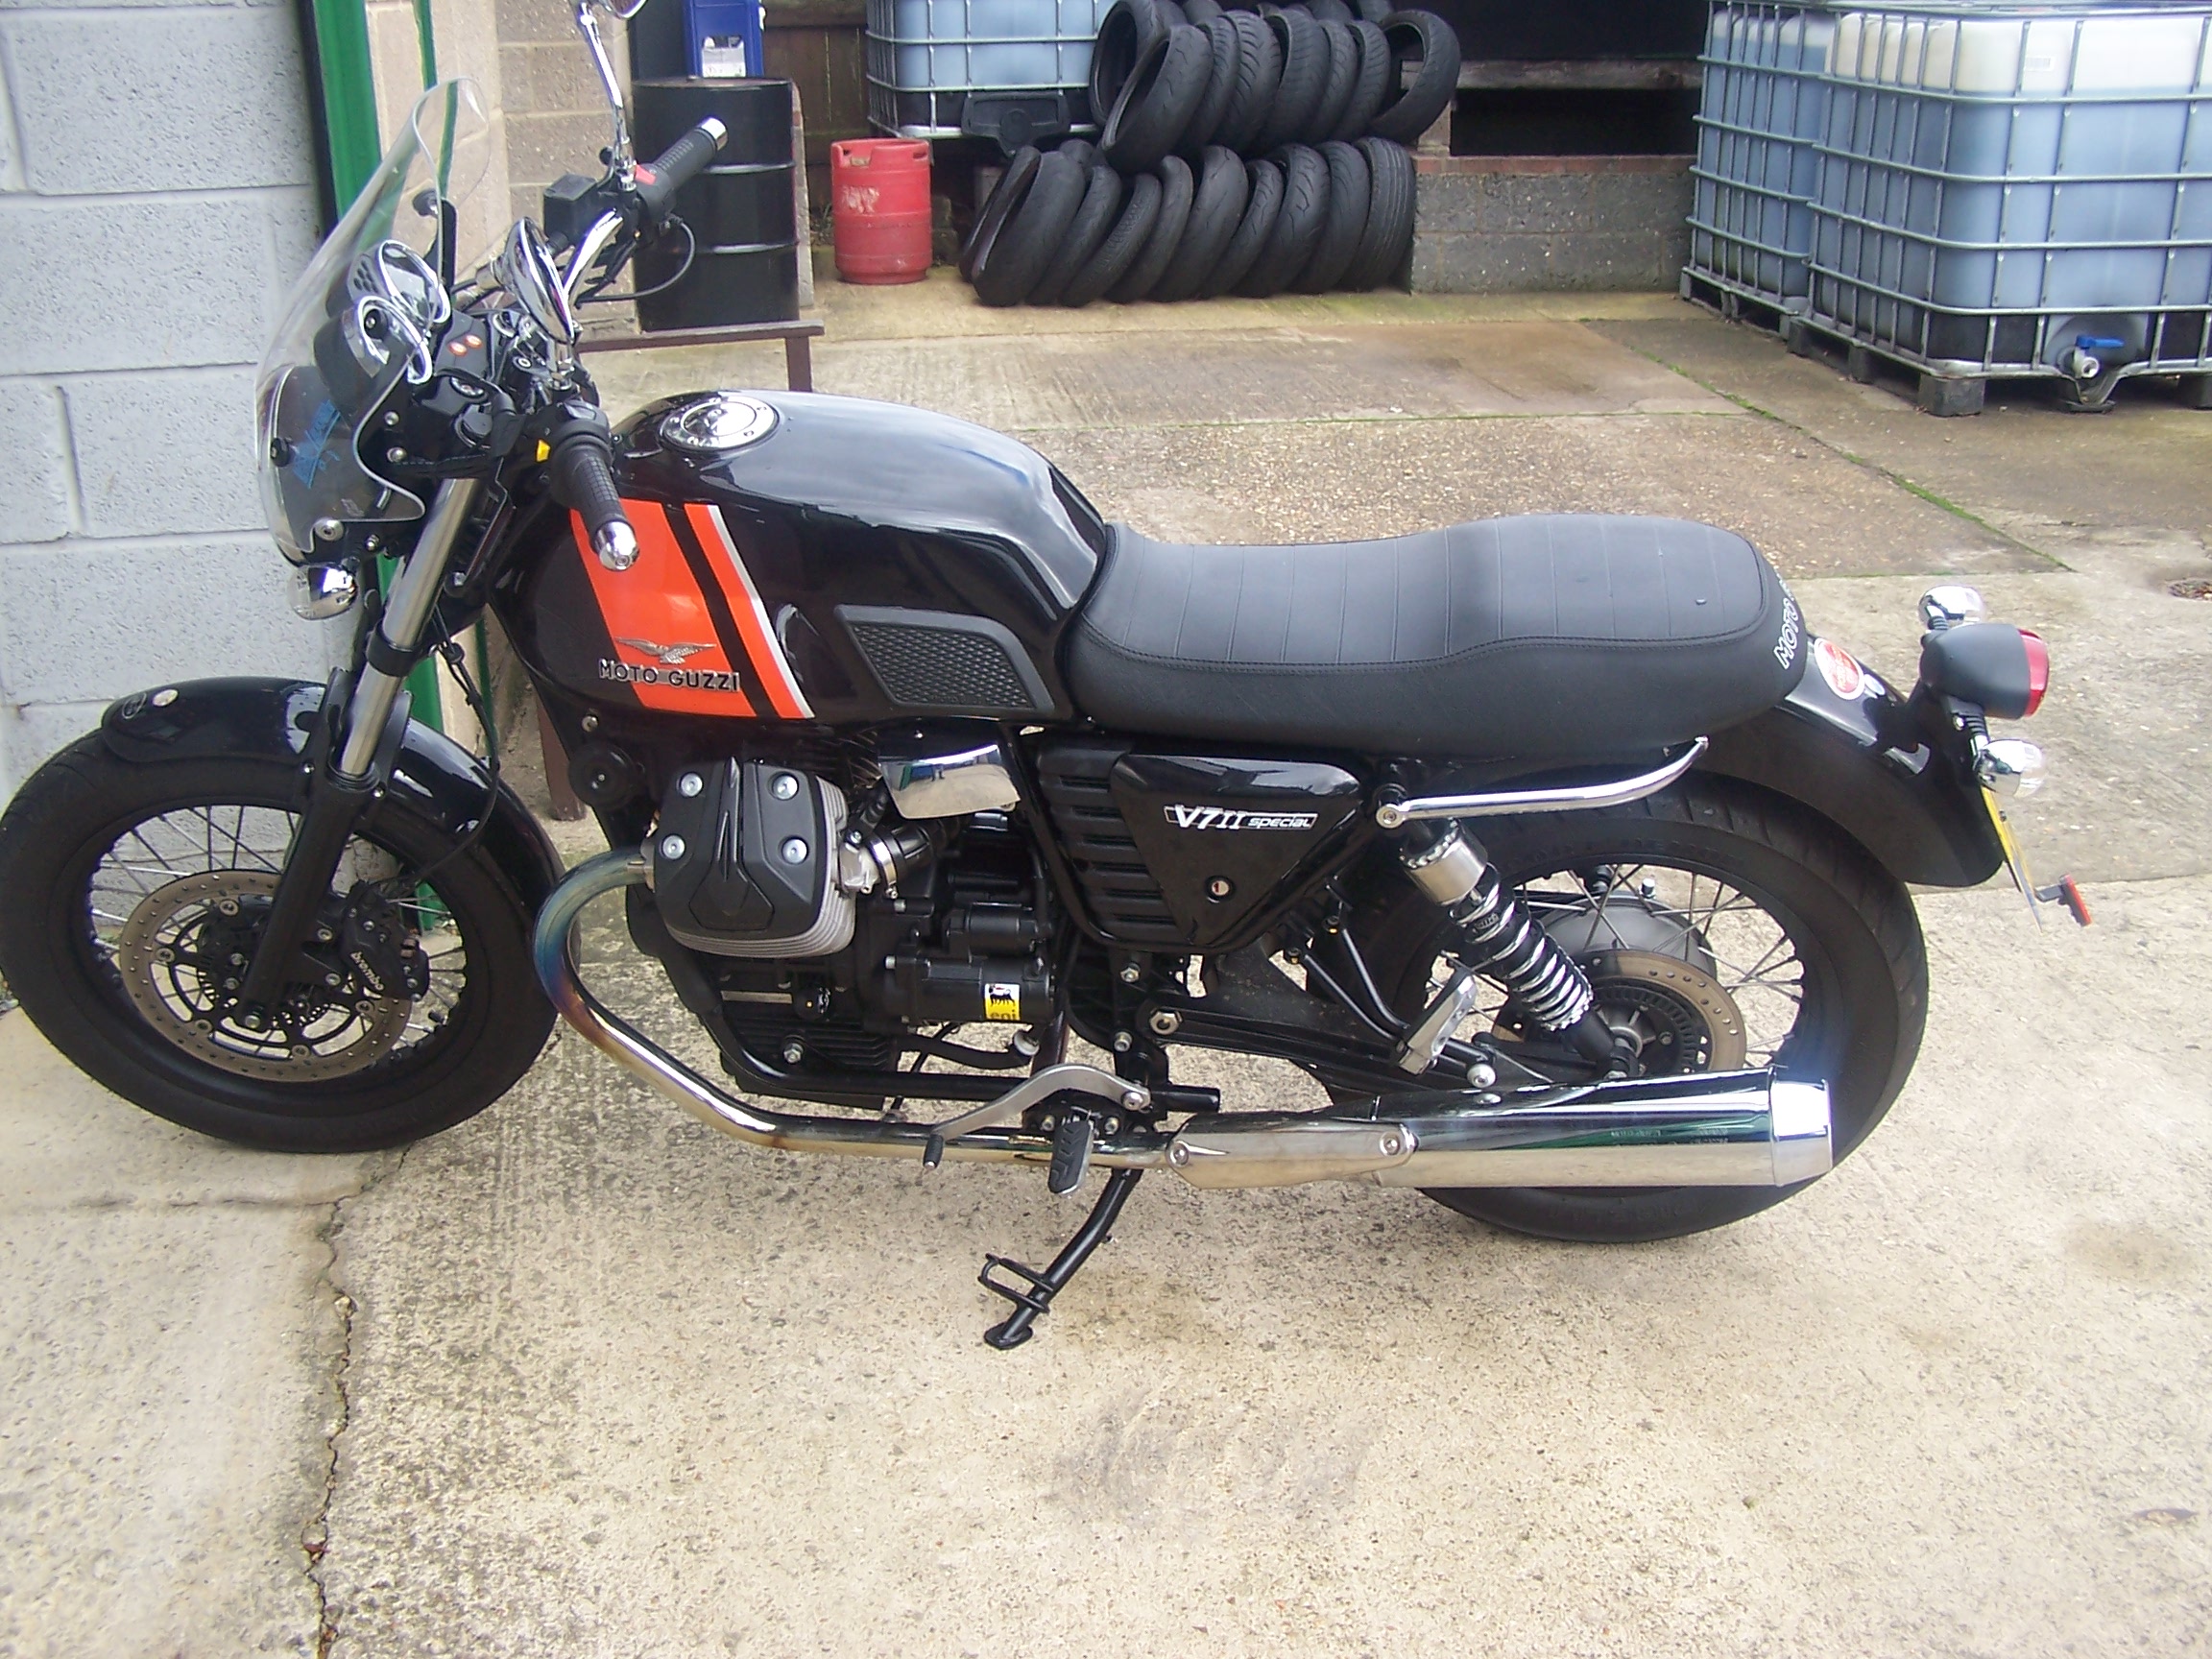 Moto Guzzi V7 Classic ECU remap to sort out a wheezy engine starved of fuel